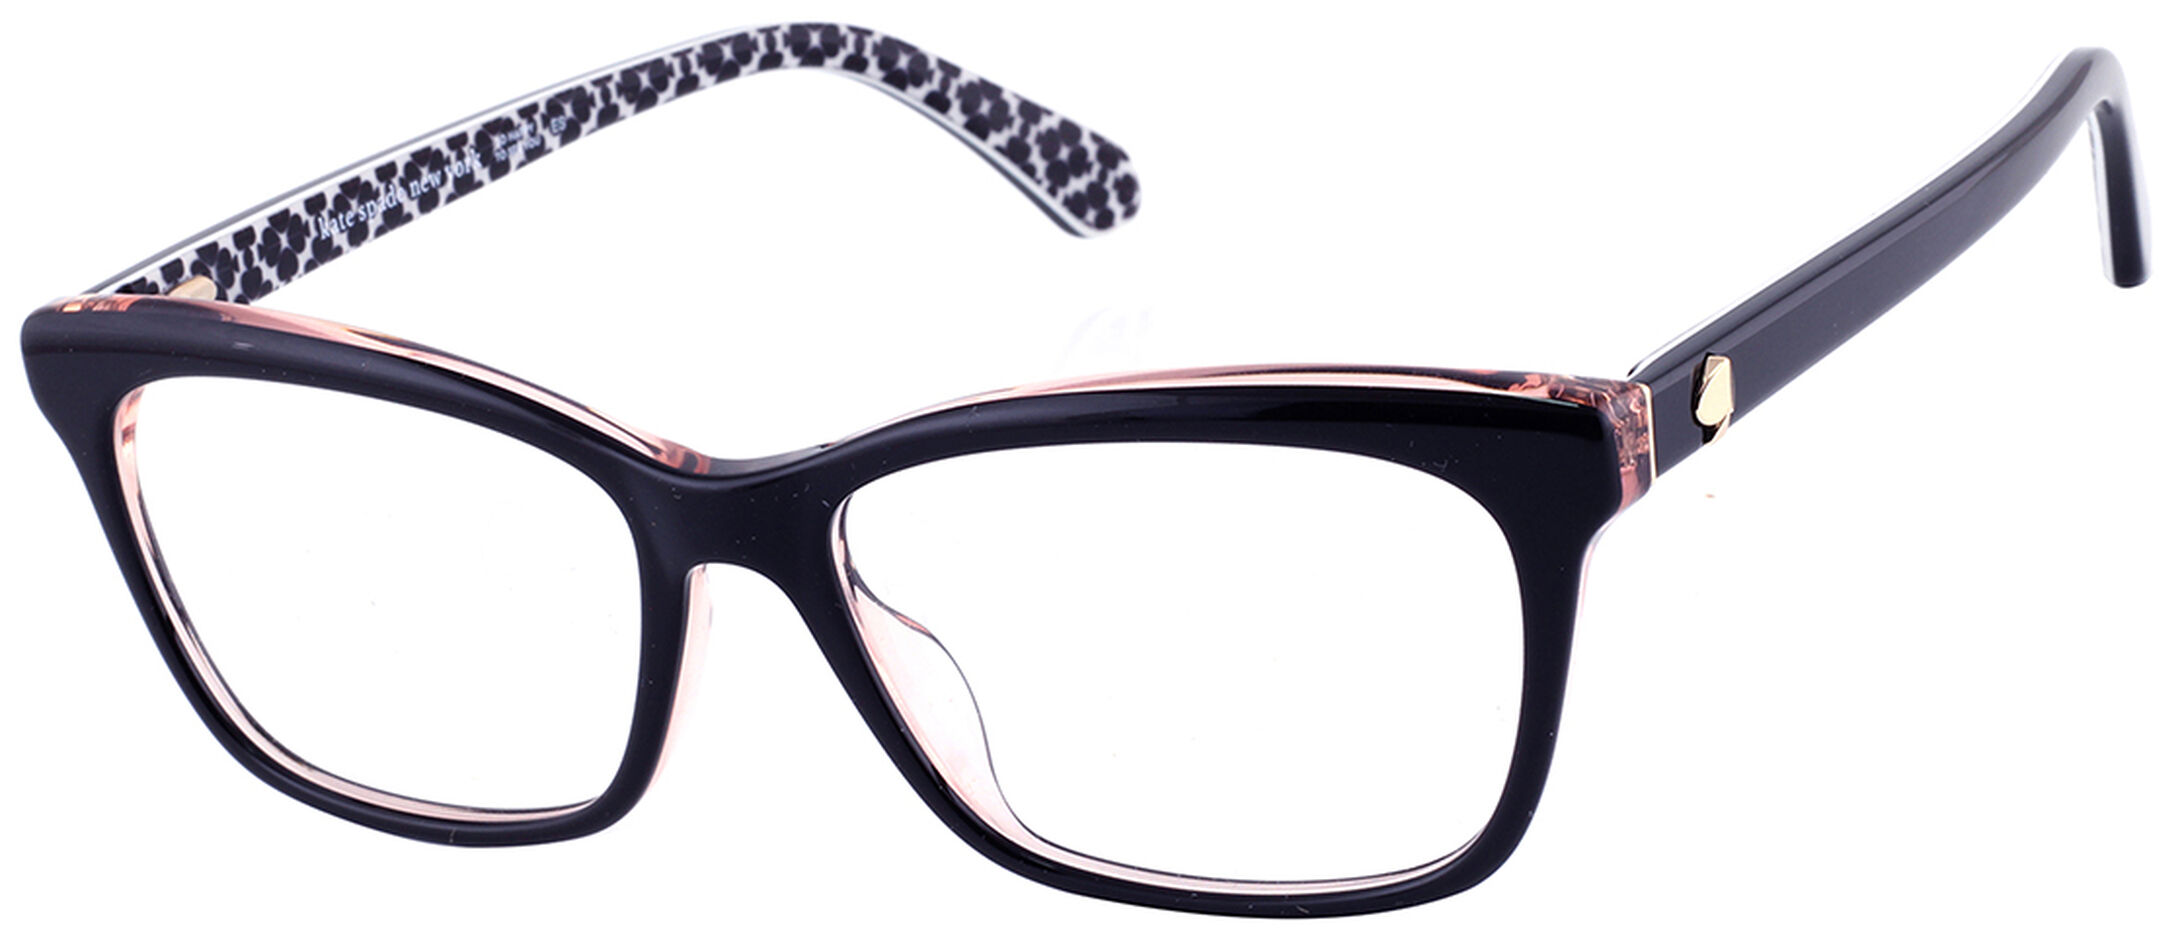 Kate Spade CARDEA Glasses | Free Shipping and Returns | Eyeconic